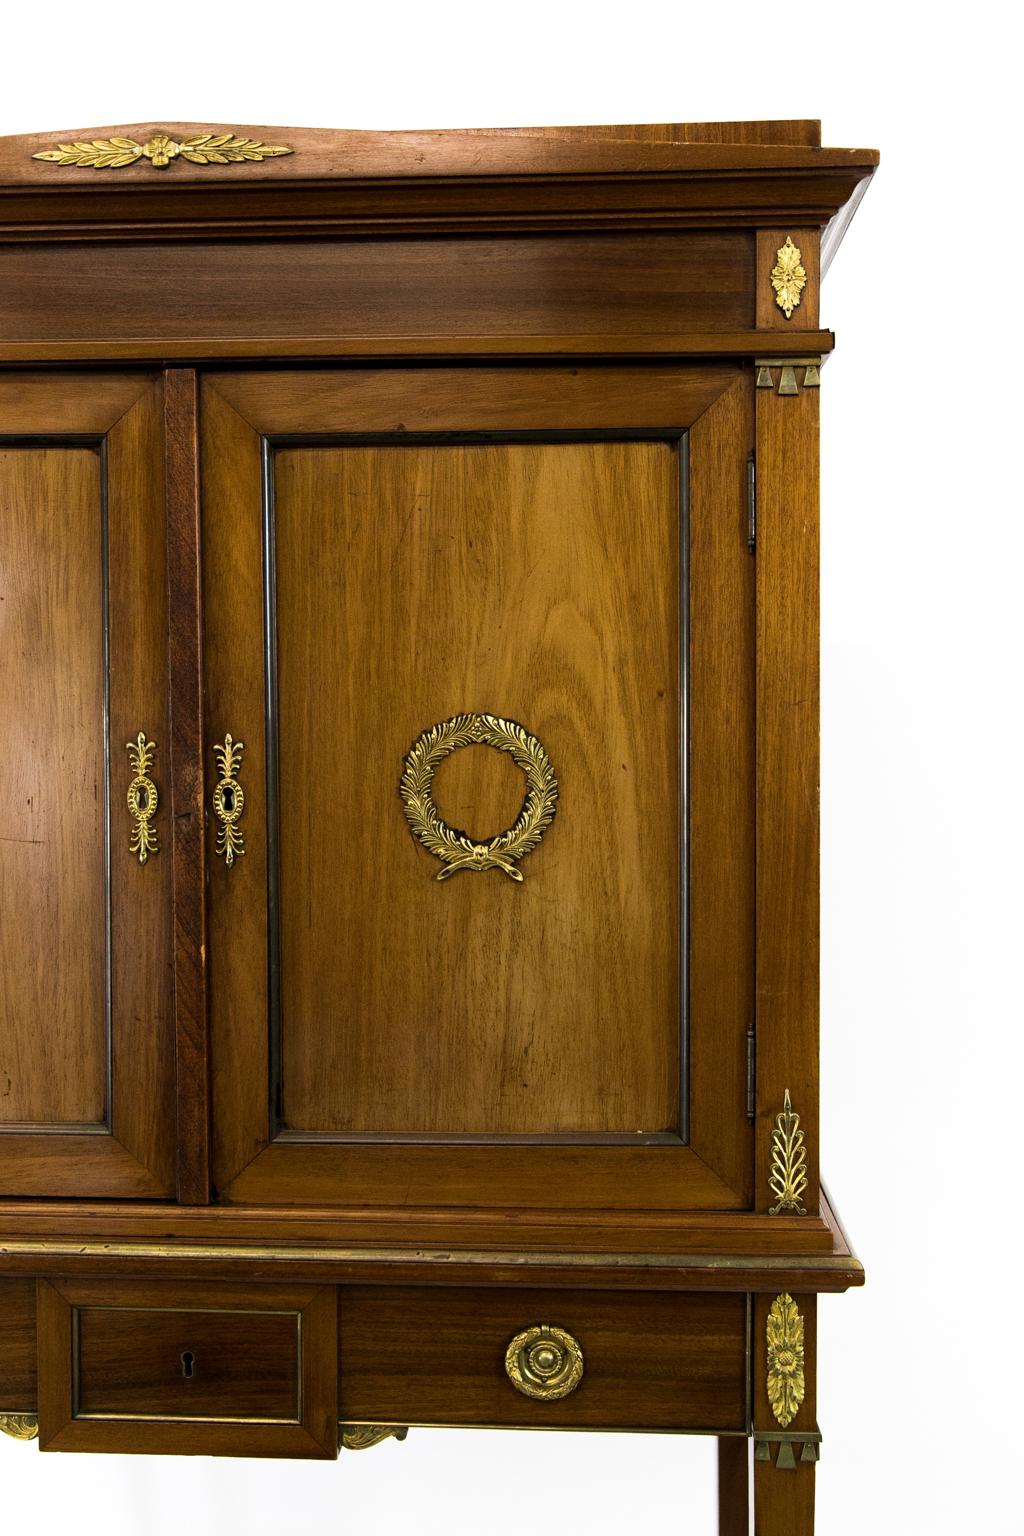 French mahogany cabinet on legs has multiple brass fittings and moldings with an architectural pediment on top. The color is somewhat faded.
  